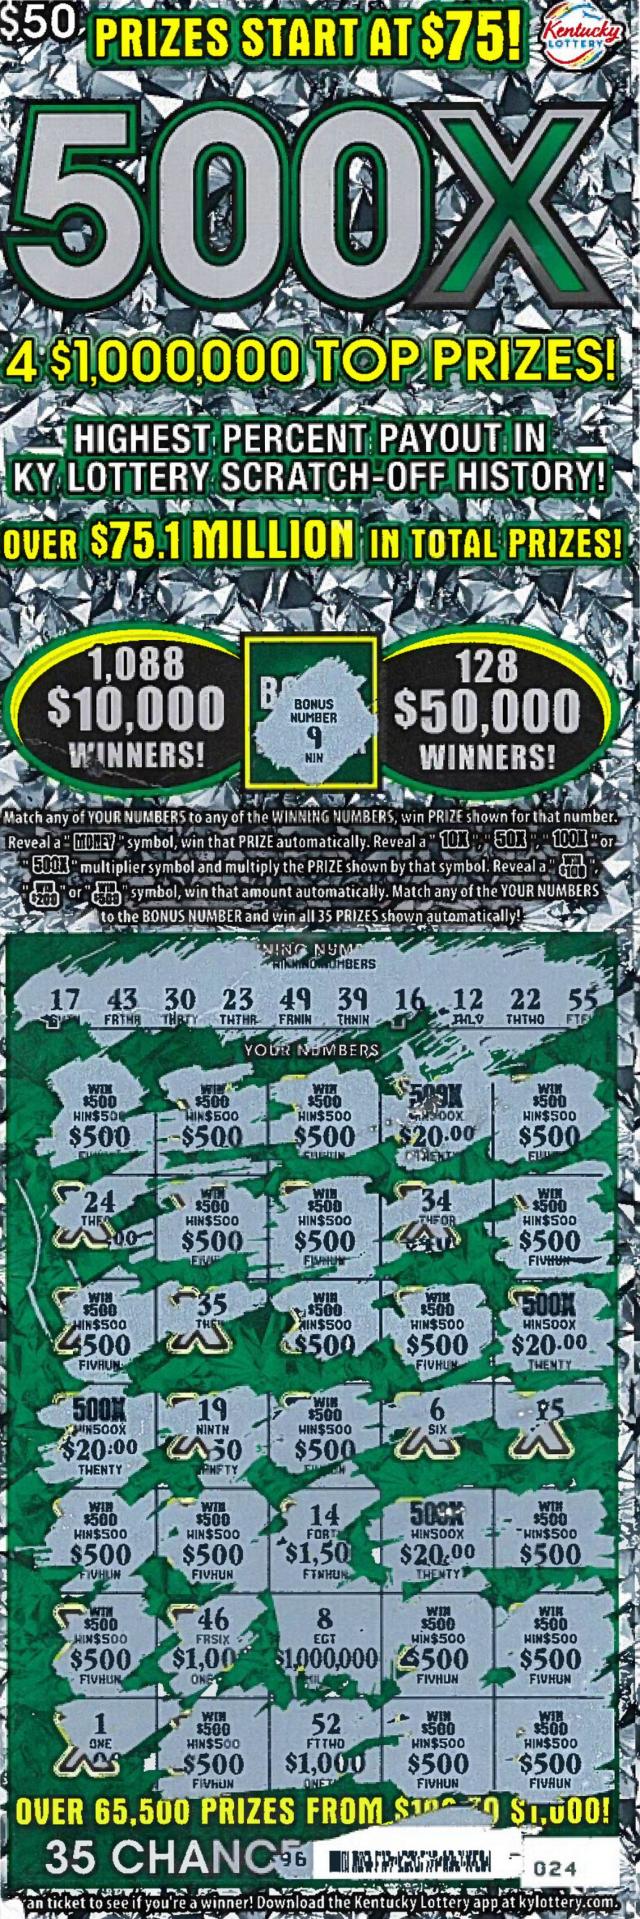 An Ohio man won $50,000 on this Kentucky Lottery scratch-off ticket last week after purchasing the ticket from a Sparta, Ky., truck stop on his lunch break.